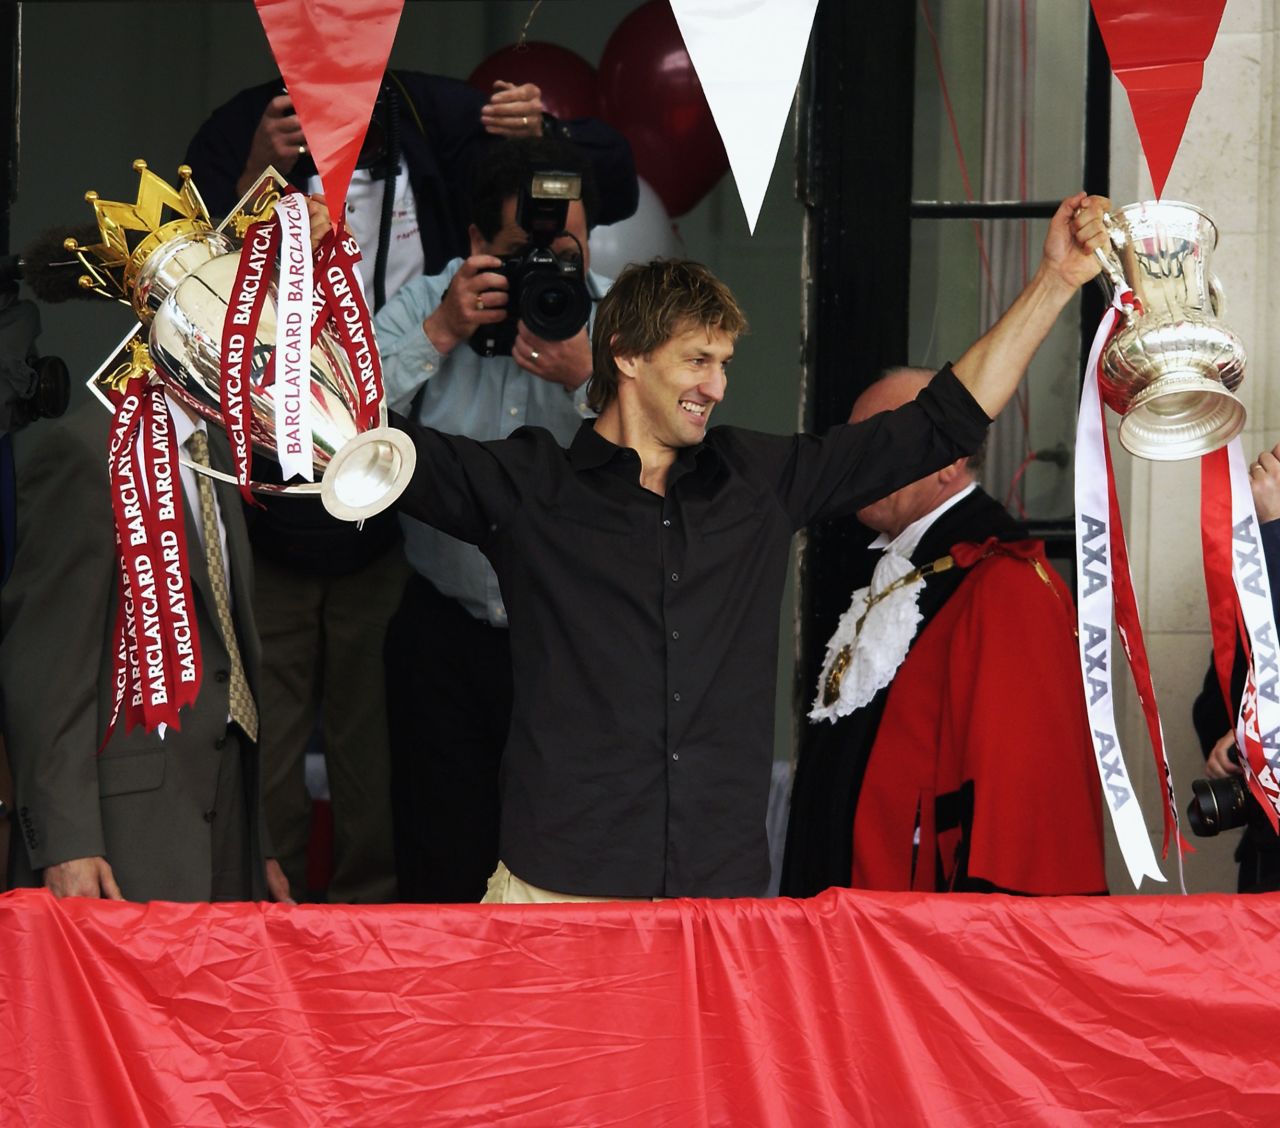 Tony Adams struggled with alcohol and drug addiction throughout his career, serving a jail sentence for drink driving in 1992. The former Arsenal captain managed to turn his life around, leading the north London club to a league and FA Cup double in 2002. He also set up the Sporting Chance clinic, aimed at helping fellow sportsmen and women hooked on gambling, alcohol and drugs.